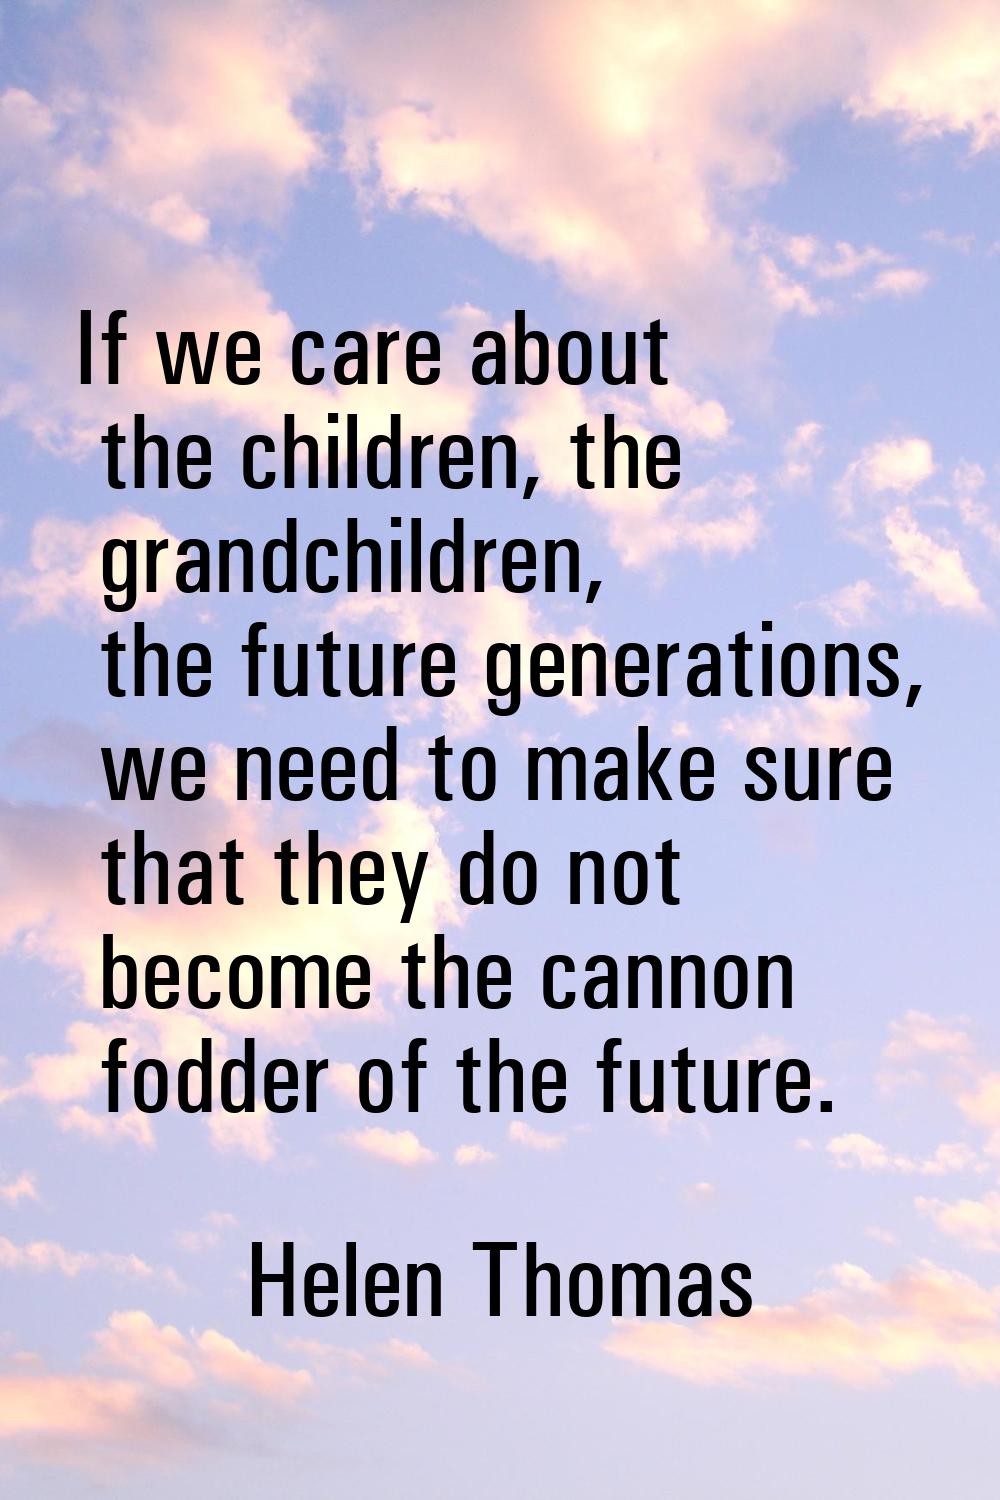 If we care about the children, the grandchildren, the future generations, we need to make sure that